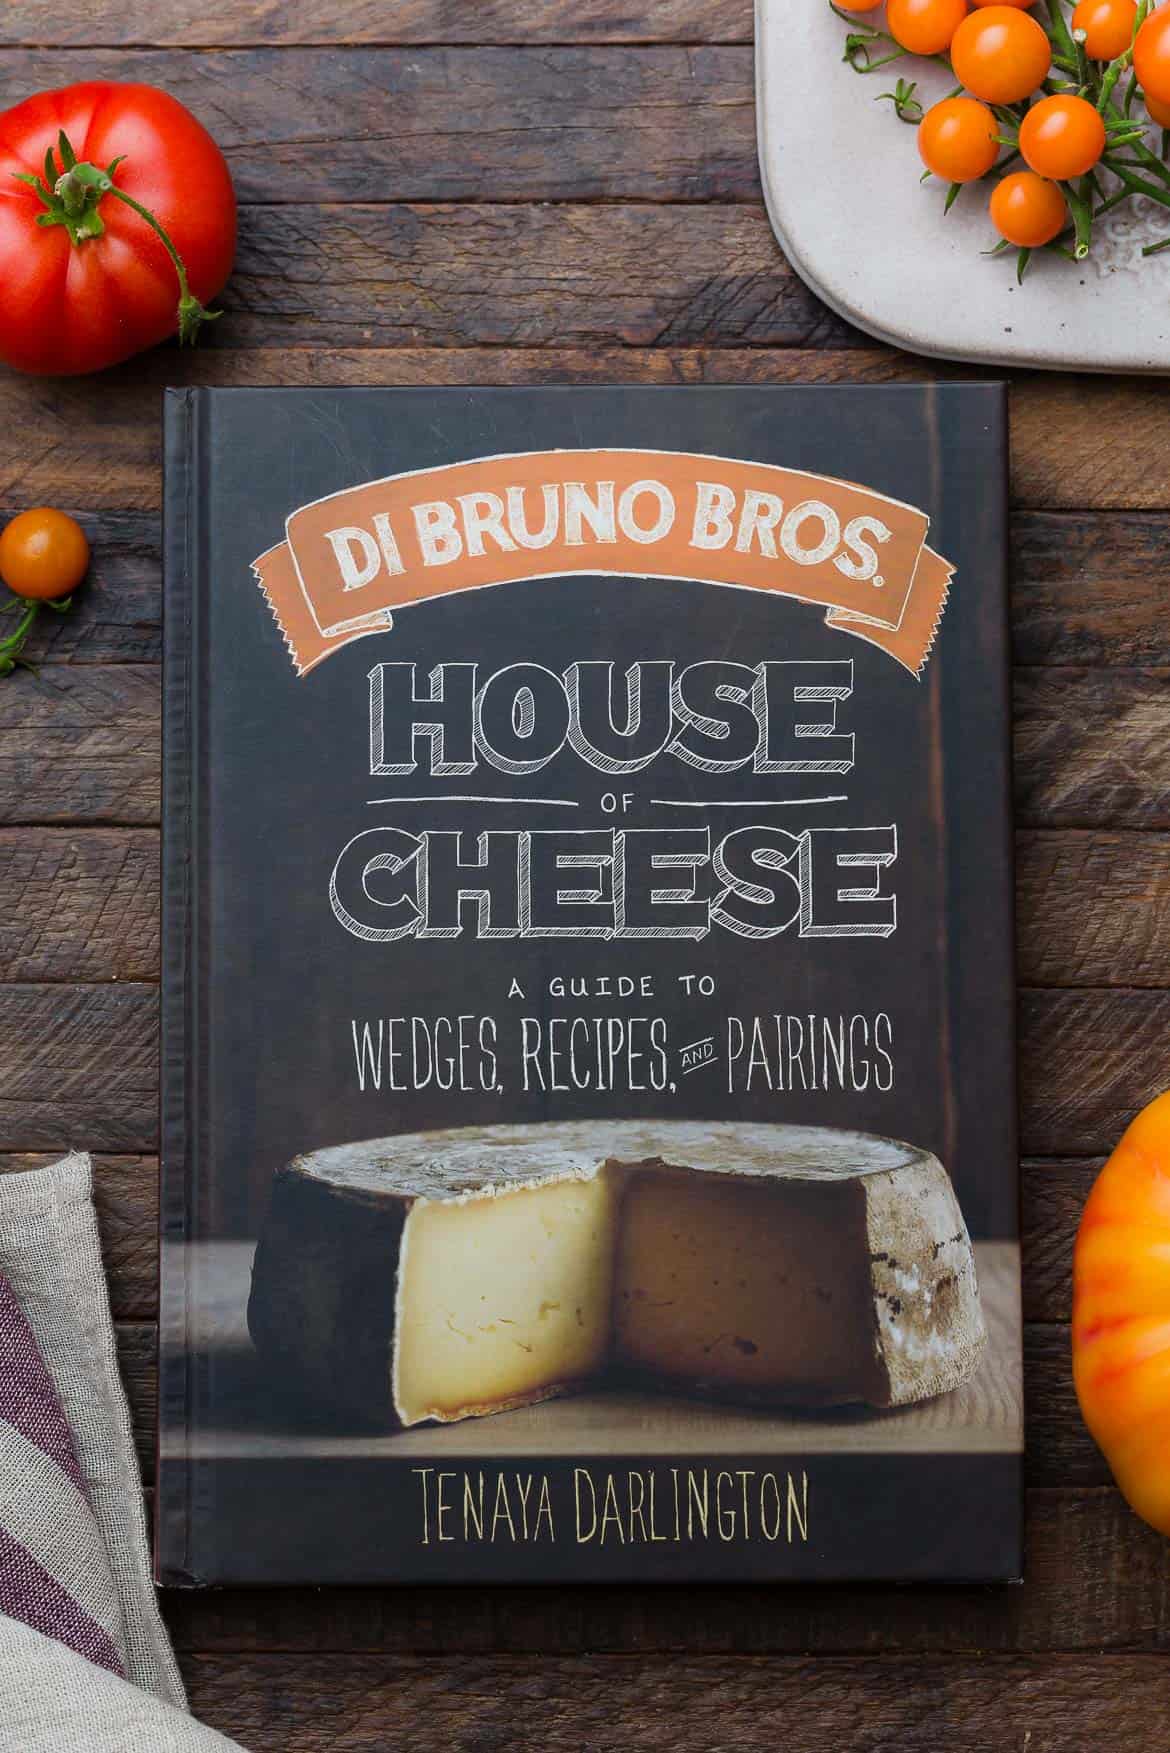 Di Bruno Bros House of Cheese Cookbook on a wooden surface.